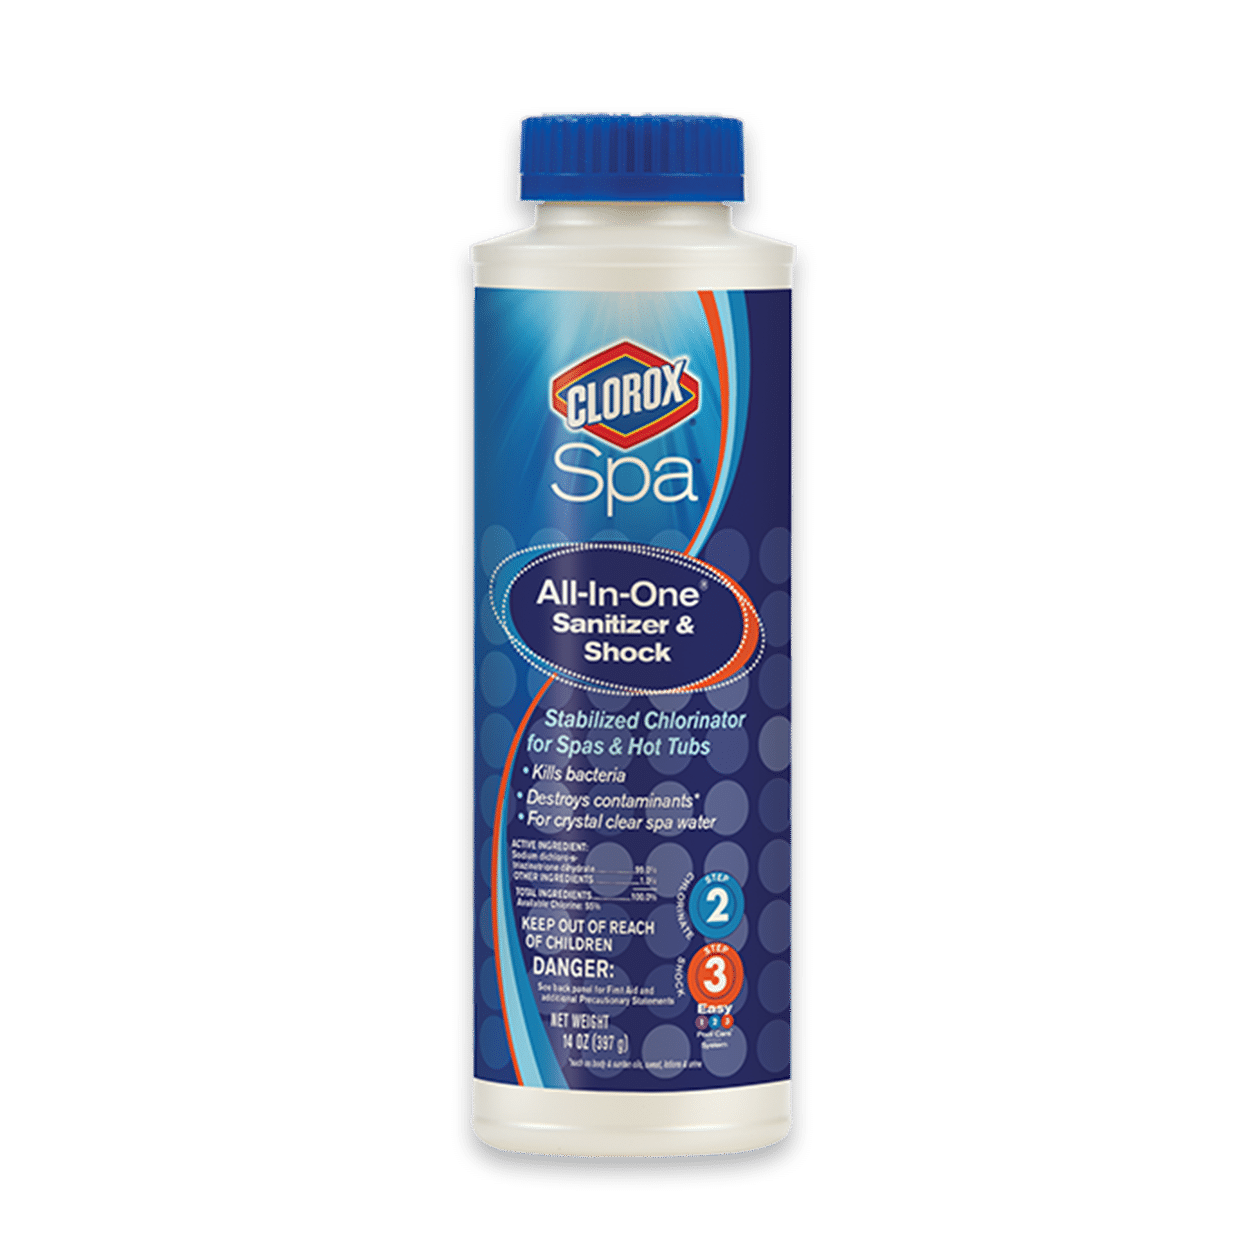 Opsplitsen Nauwgezet Winderig All-in-One Sanitizer and Shock | Spa Care Products | Clorox® Pool&Spa™